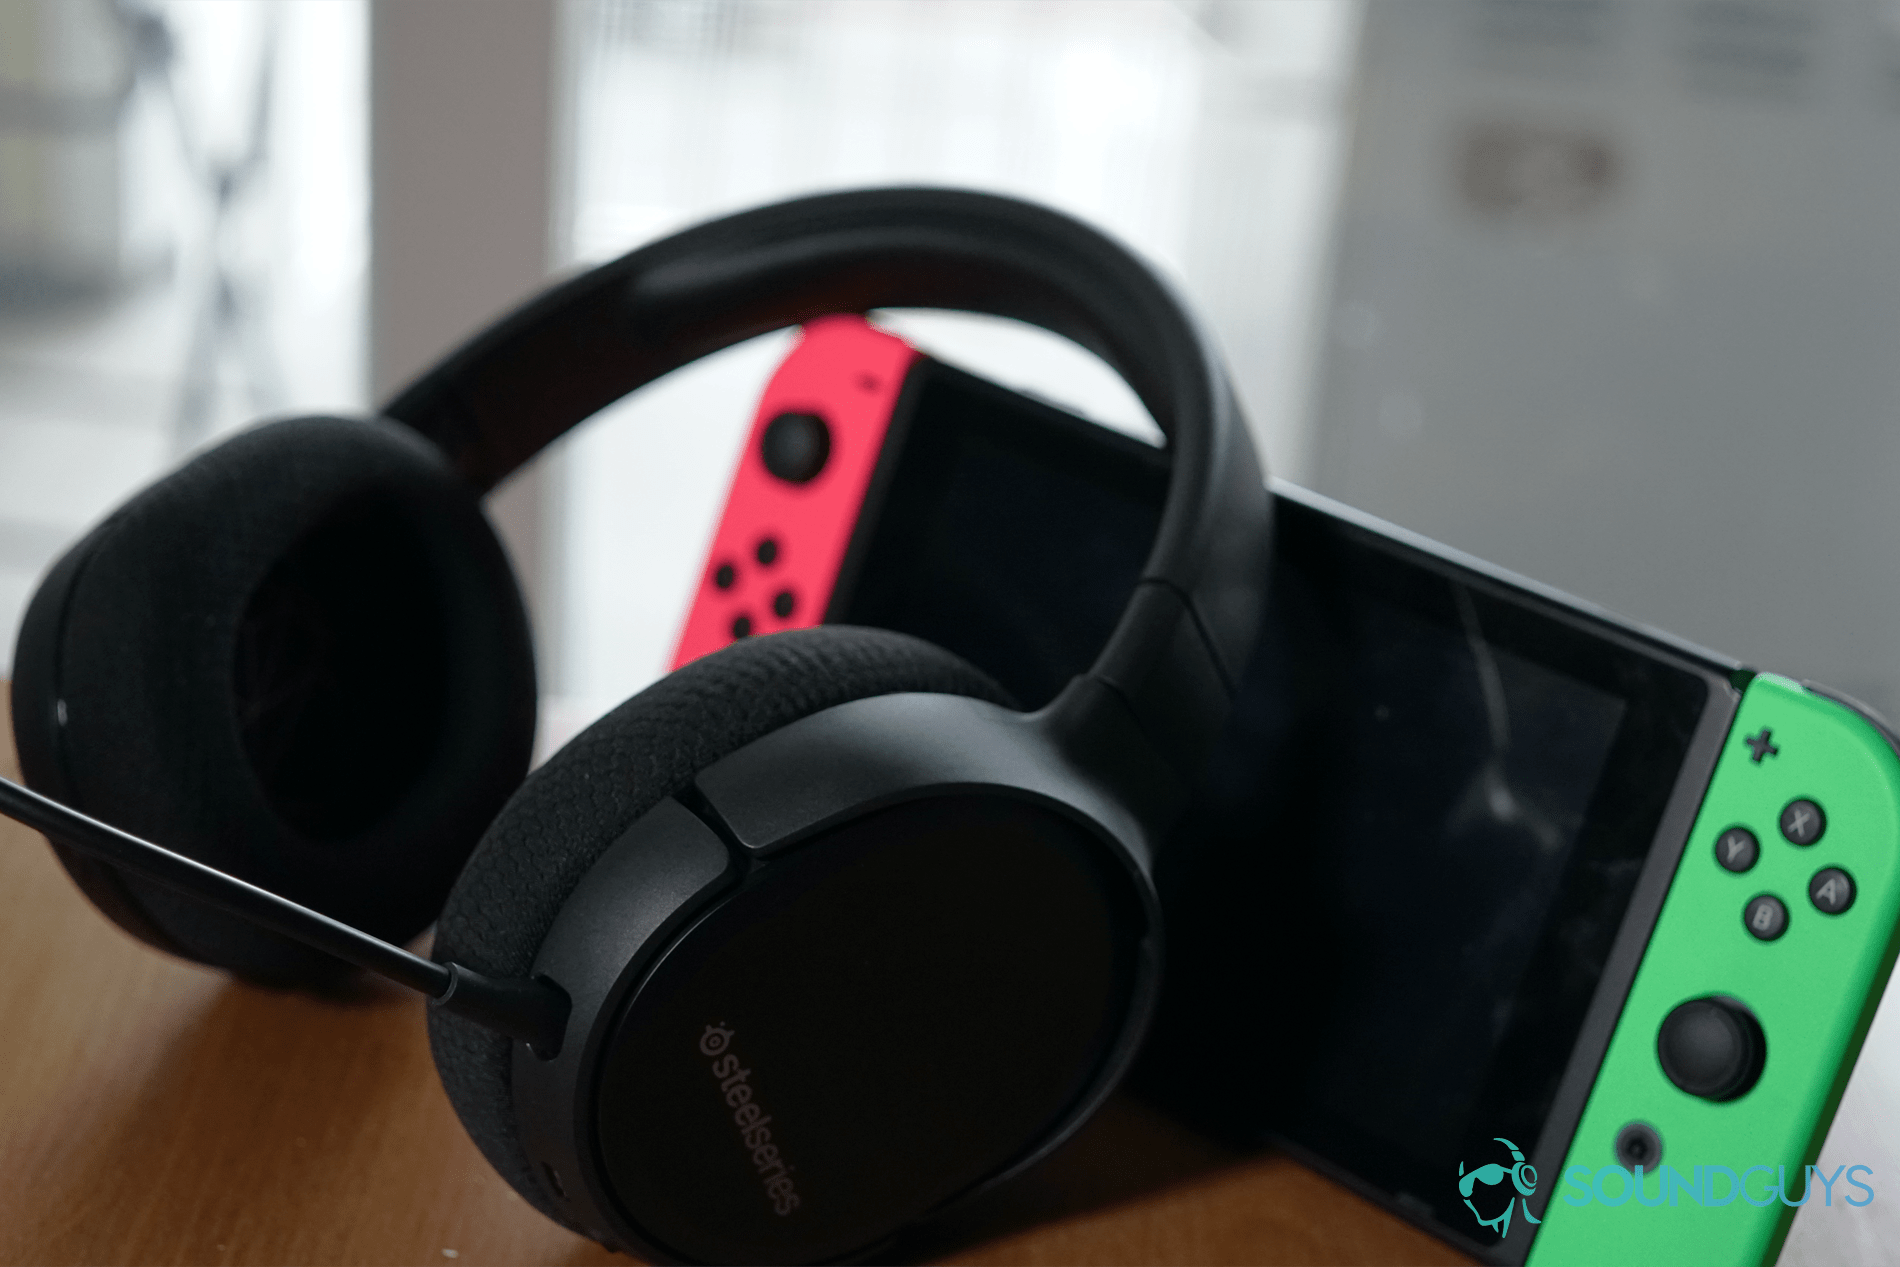 The SteelSeries Arctis 1 Wireless gaming headset on top of a Nintendo Switch.